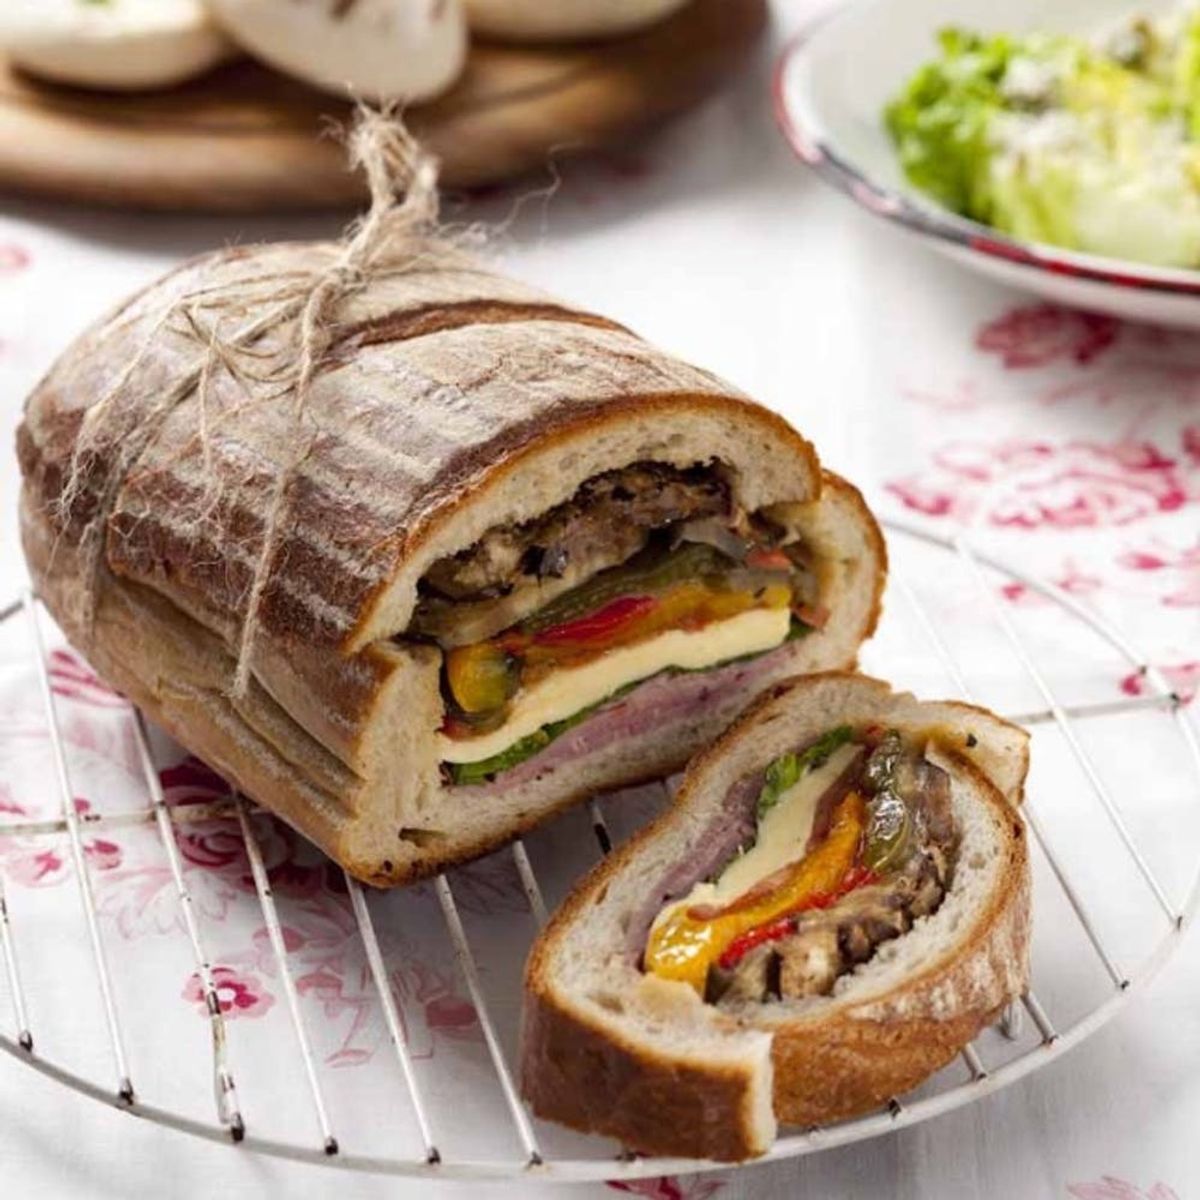 Stuffed Picnic Loaves Are the Food Hack You Need This Summer